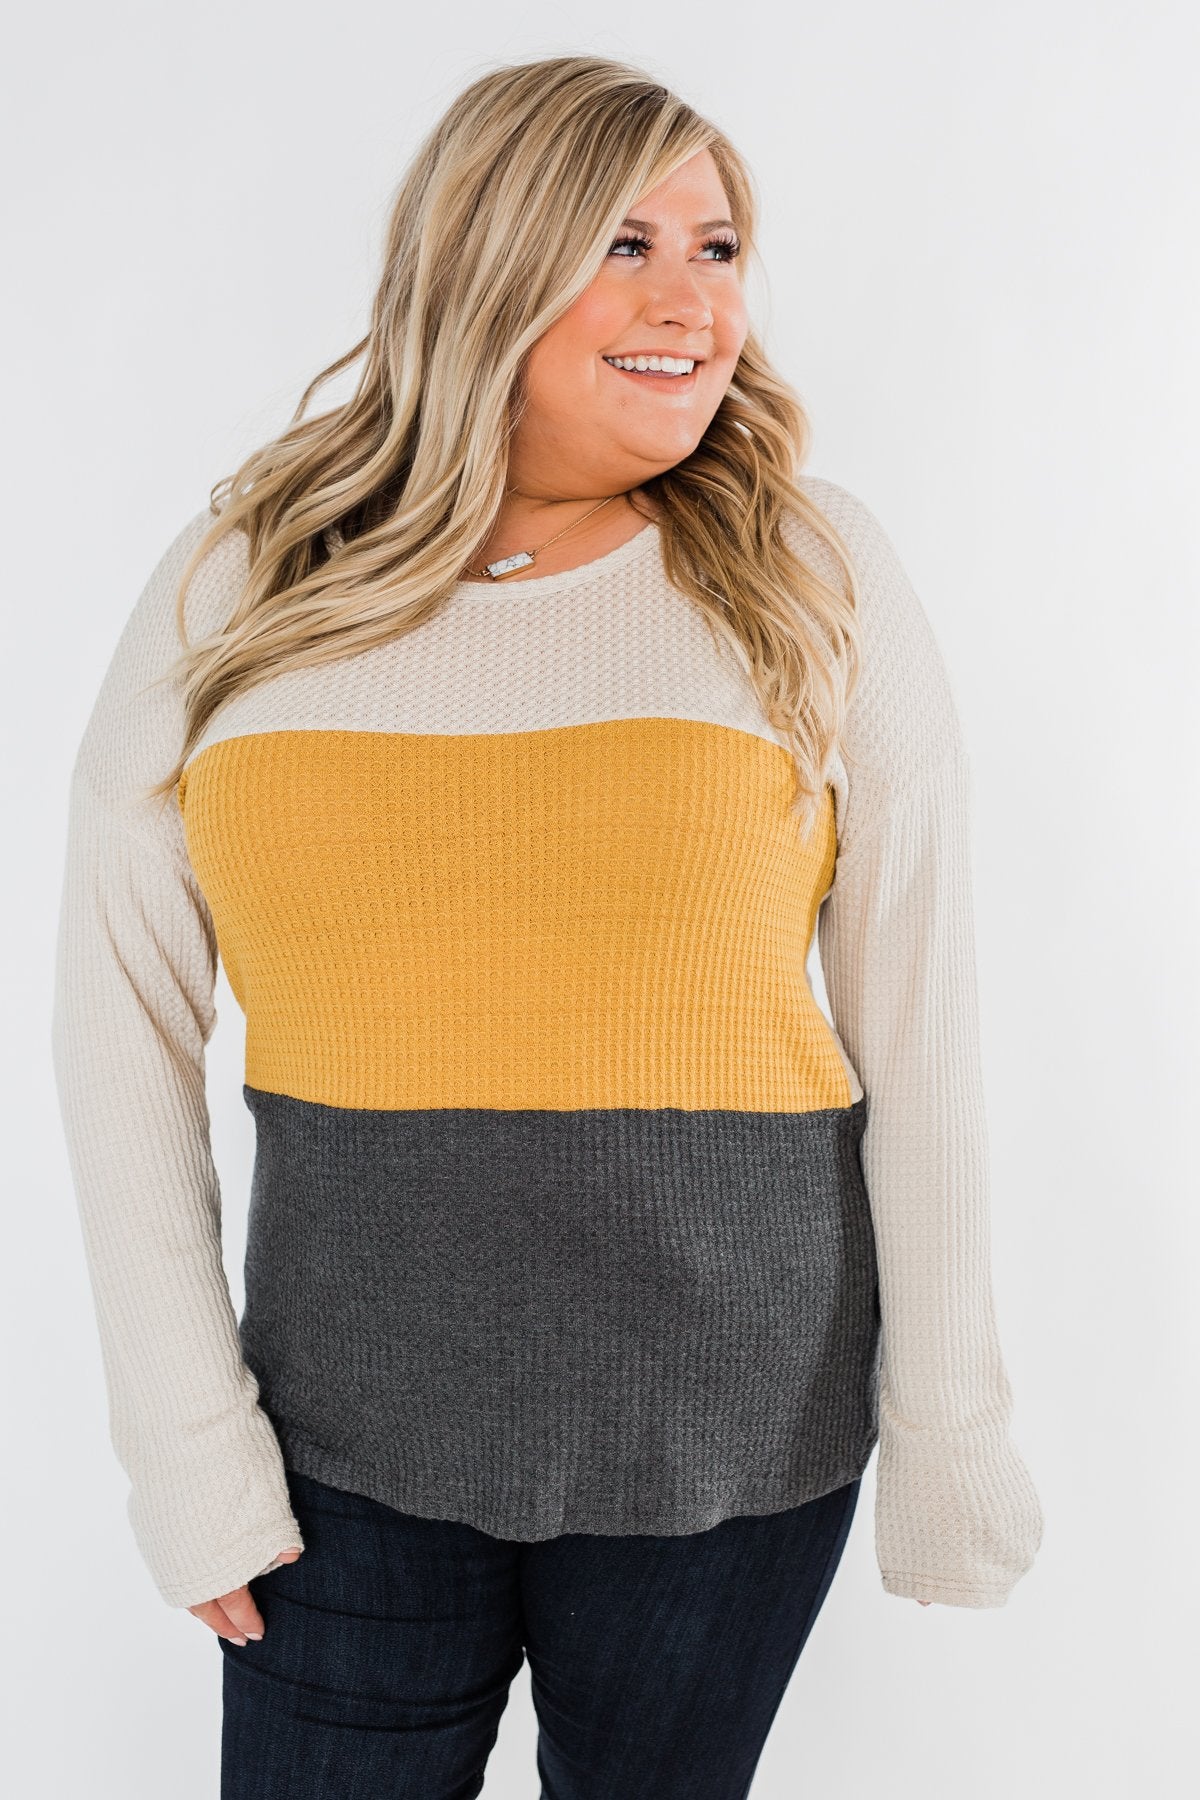 Away We Go Color Block Waffle Knit Top- Mustard & Charcoal